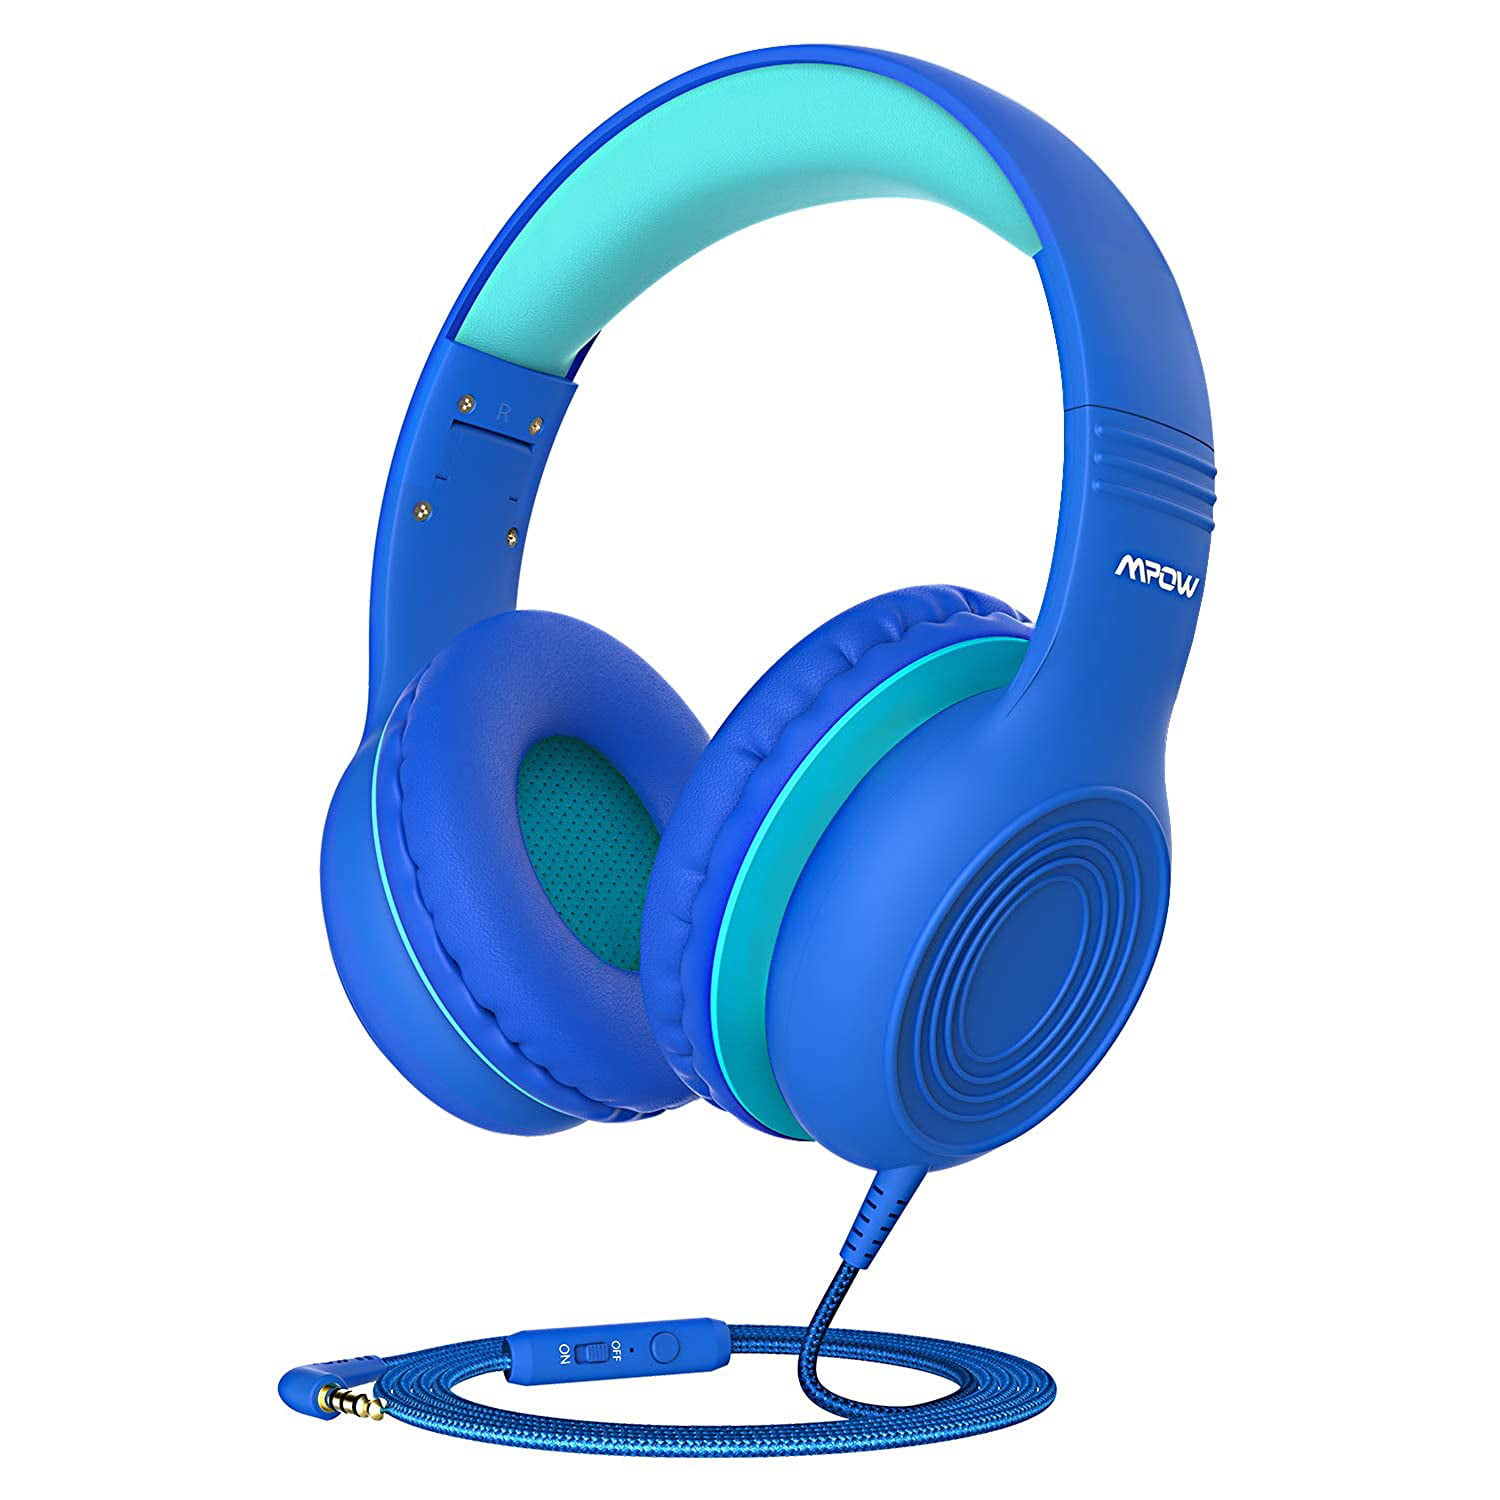 HD Sound Sharing Function Headphones for Children Boys Girls New Version Mpow CH6 Volume Limited Safe Foldable Headset w/Mic for School Kids Headphones Over-Ear/On-Ear BlackBlue